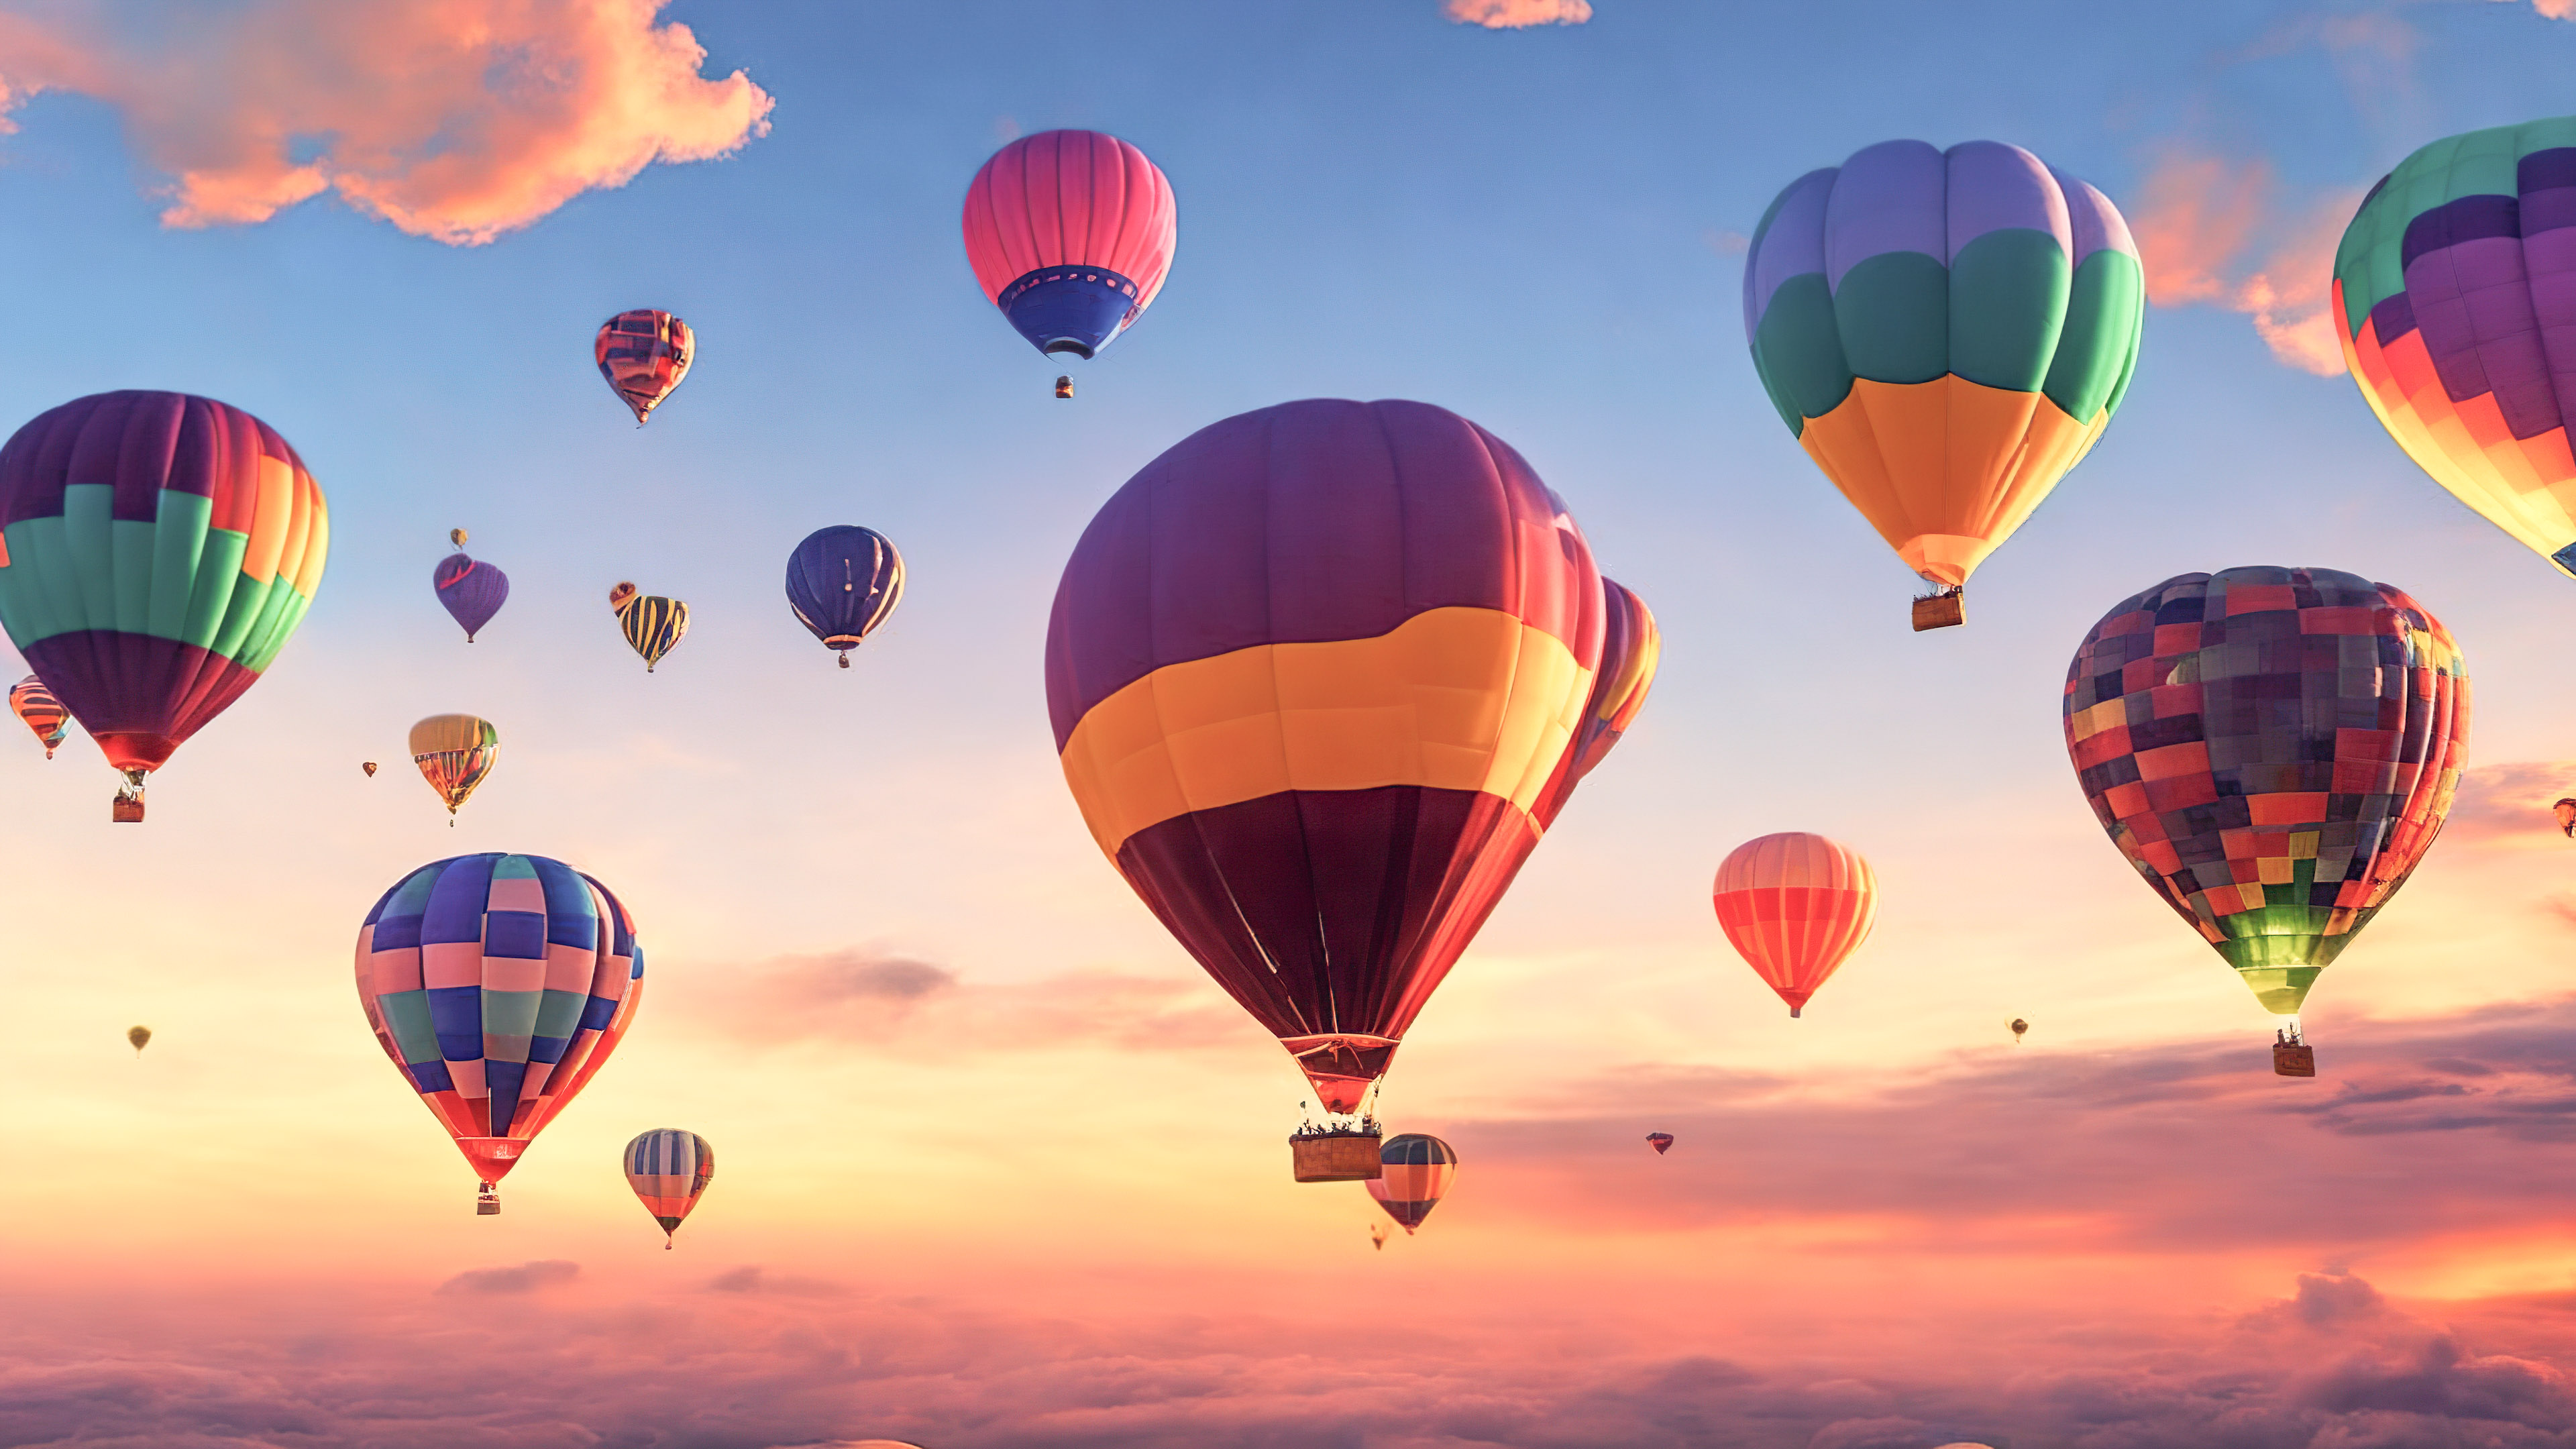 Adorn your PC with our beautiful nature wallpaper, presenting a whimsical and dreamy sky filled with floating, colorful hot air balloons at sunrise.